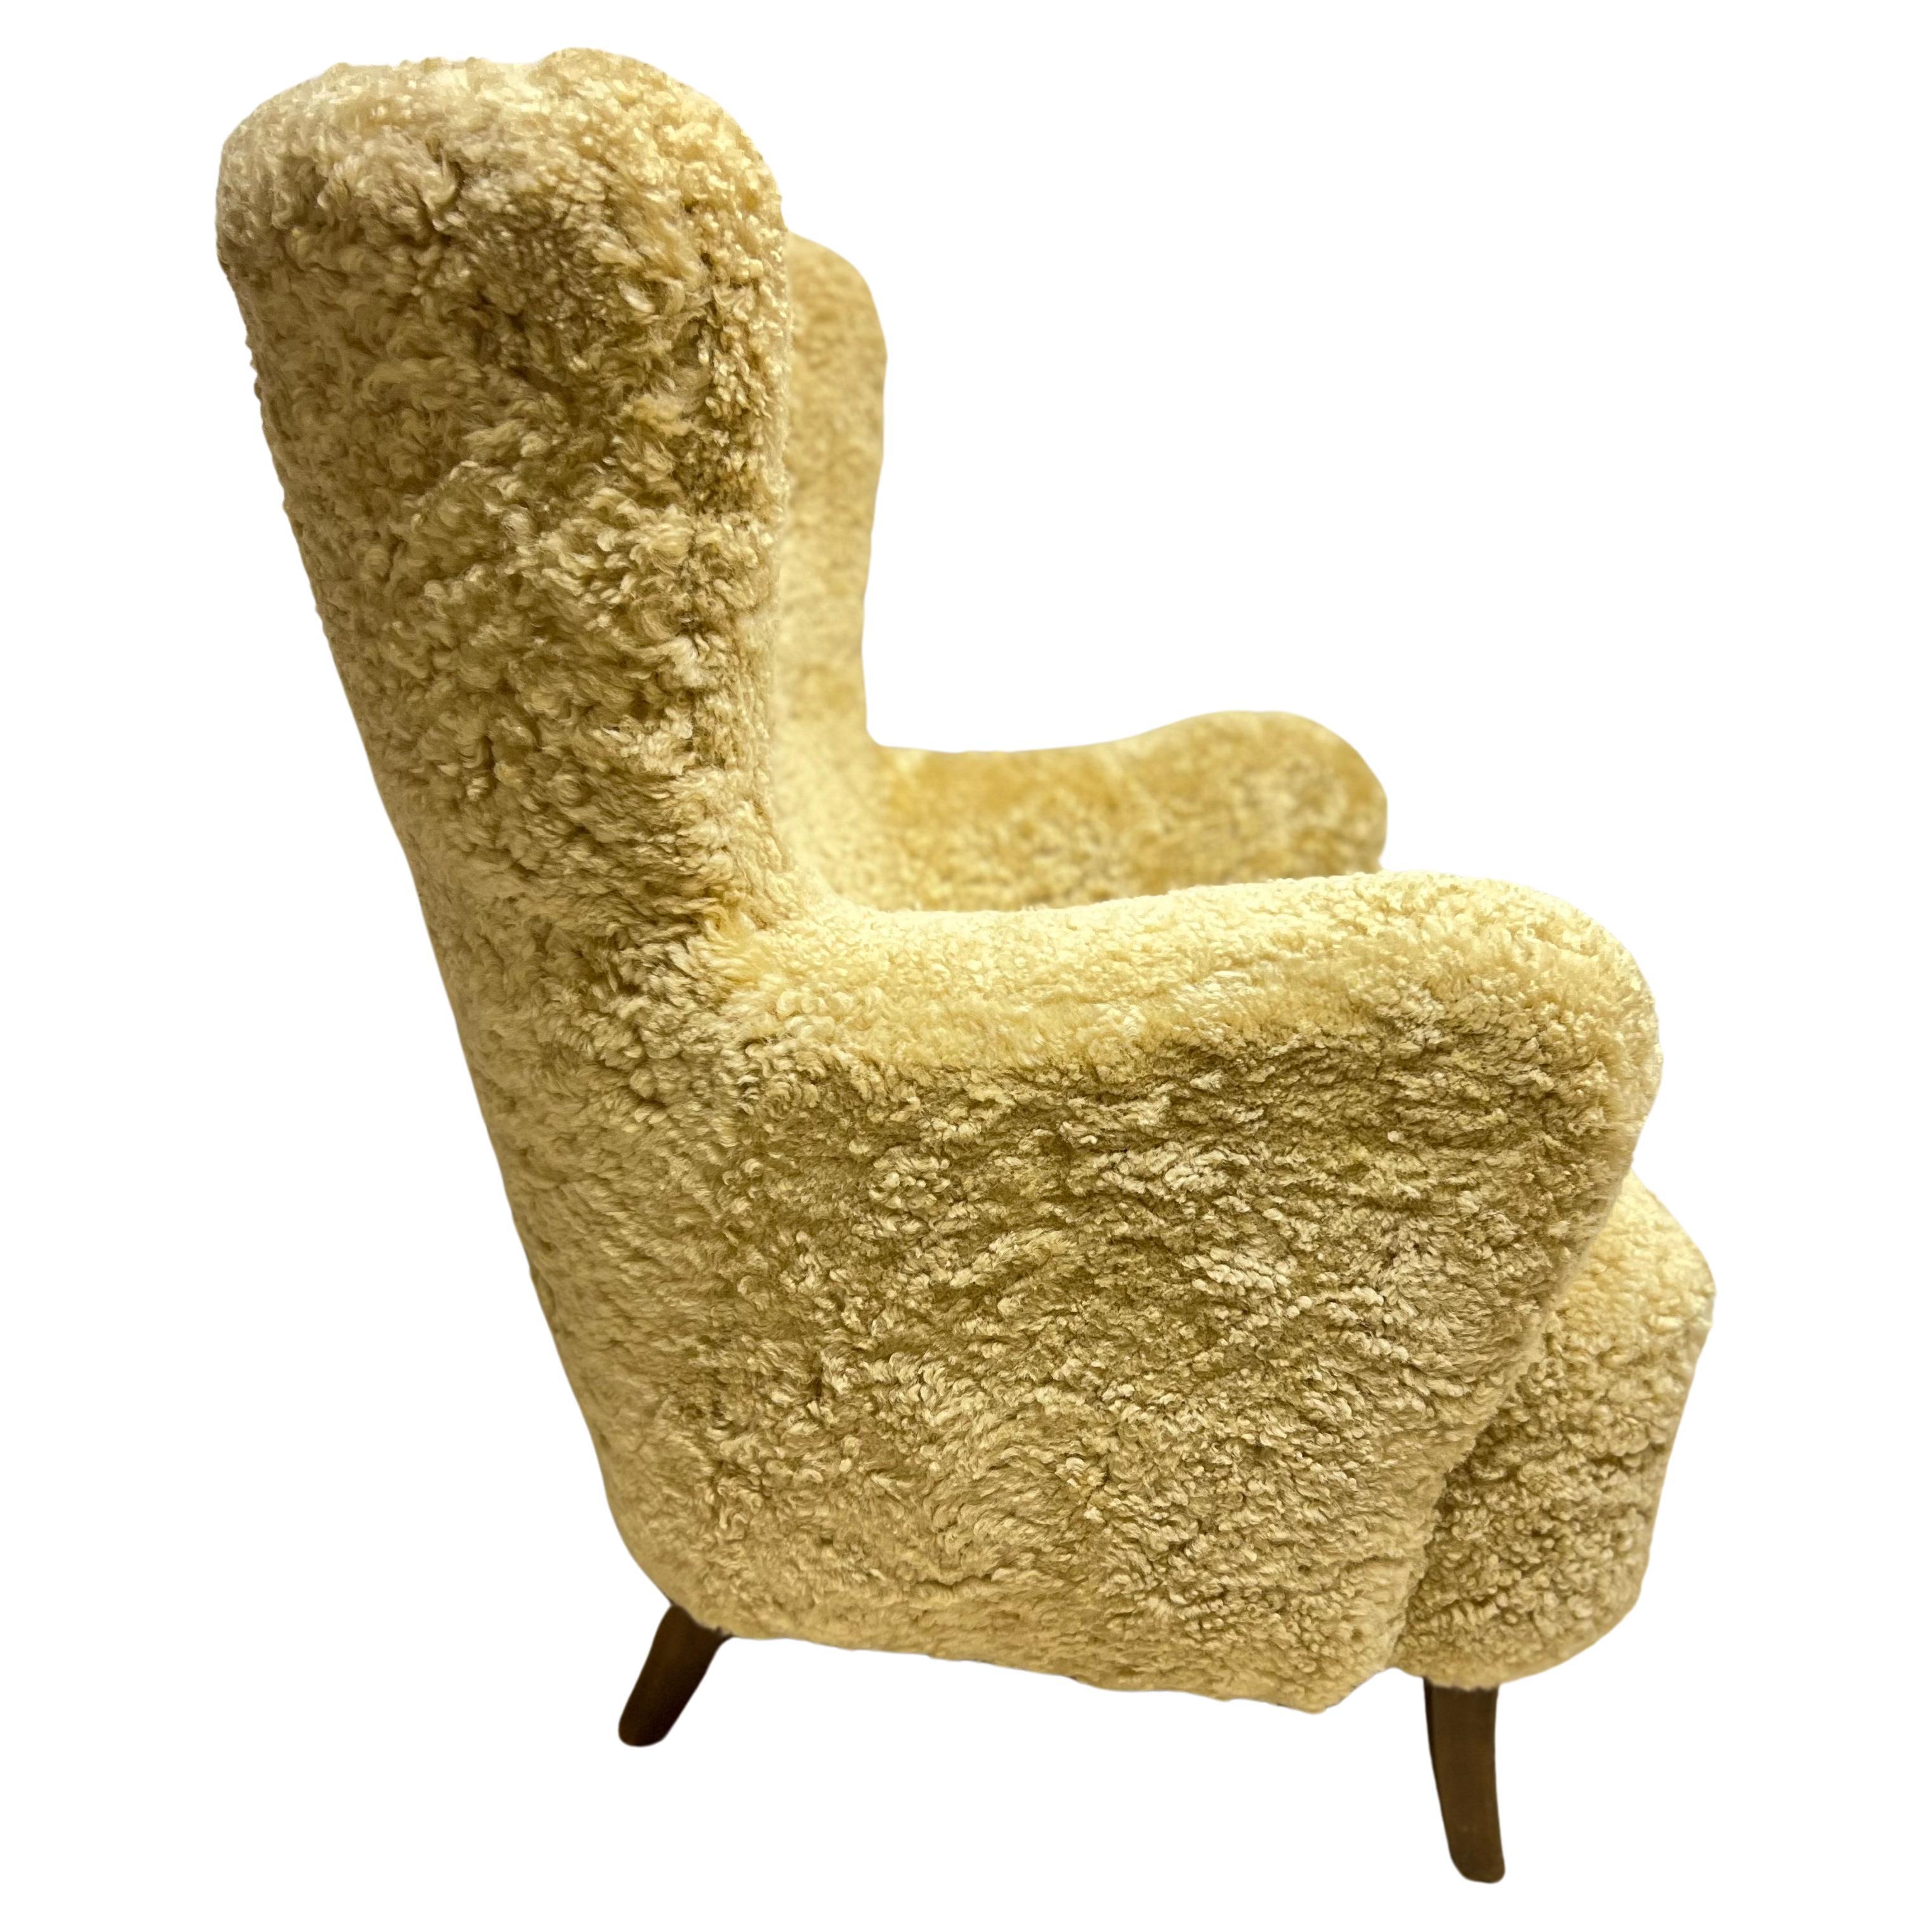 Mid-20th Century Pair of Shearling Chairs by Alfred Christensen, Denmark circa 1950 For Sale